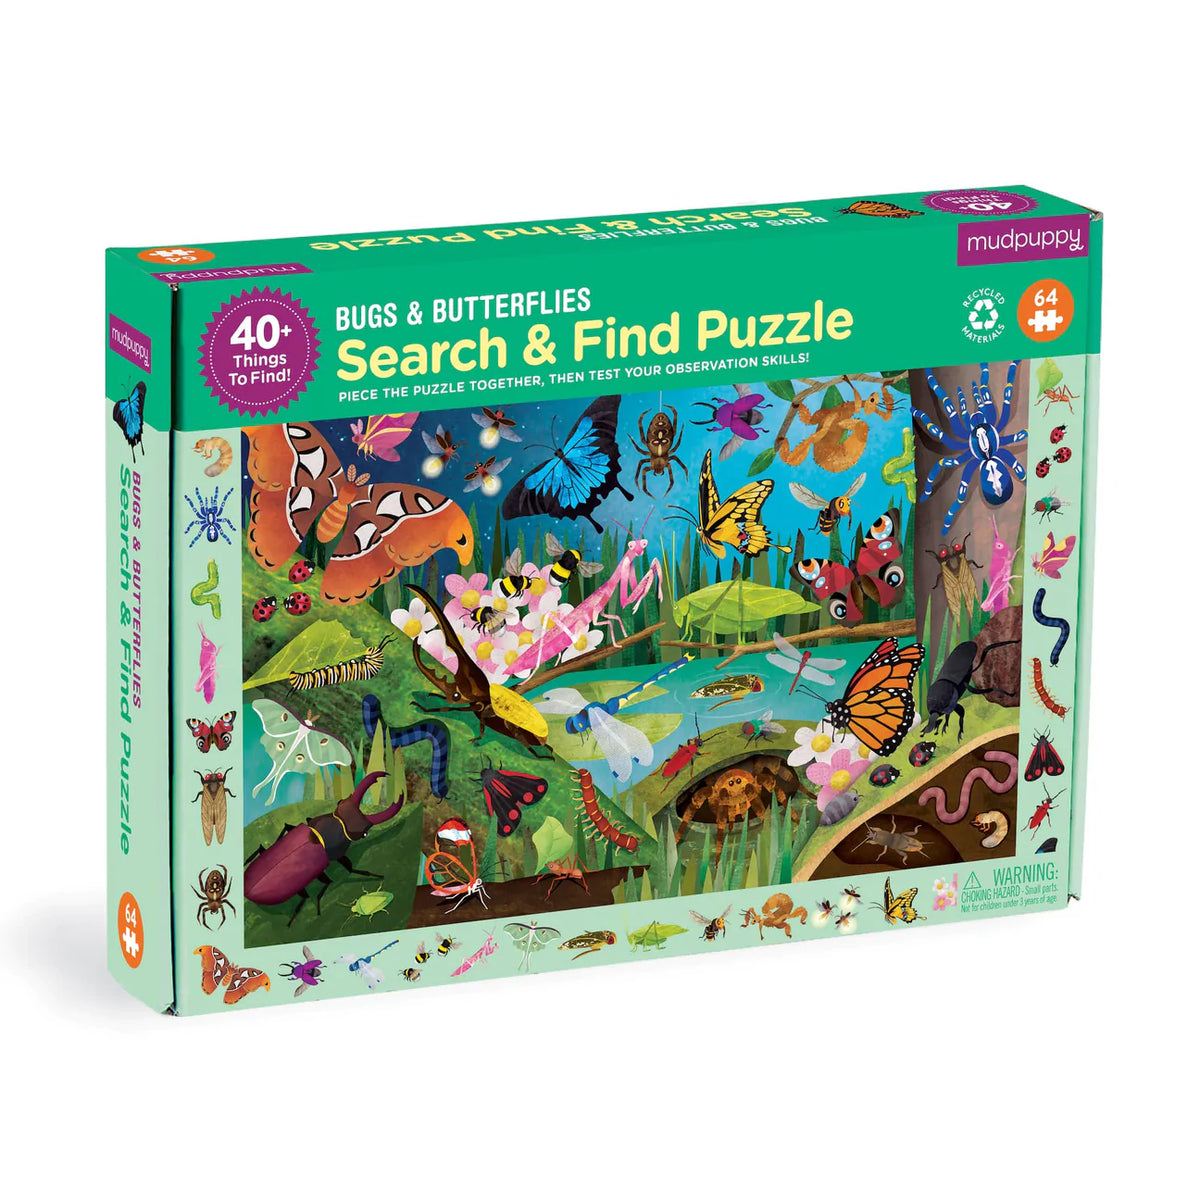 Bugs & Butterflies Search & Find Puzzle Cover